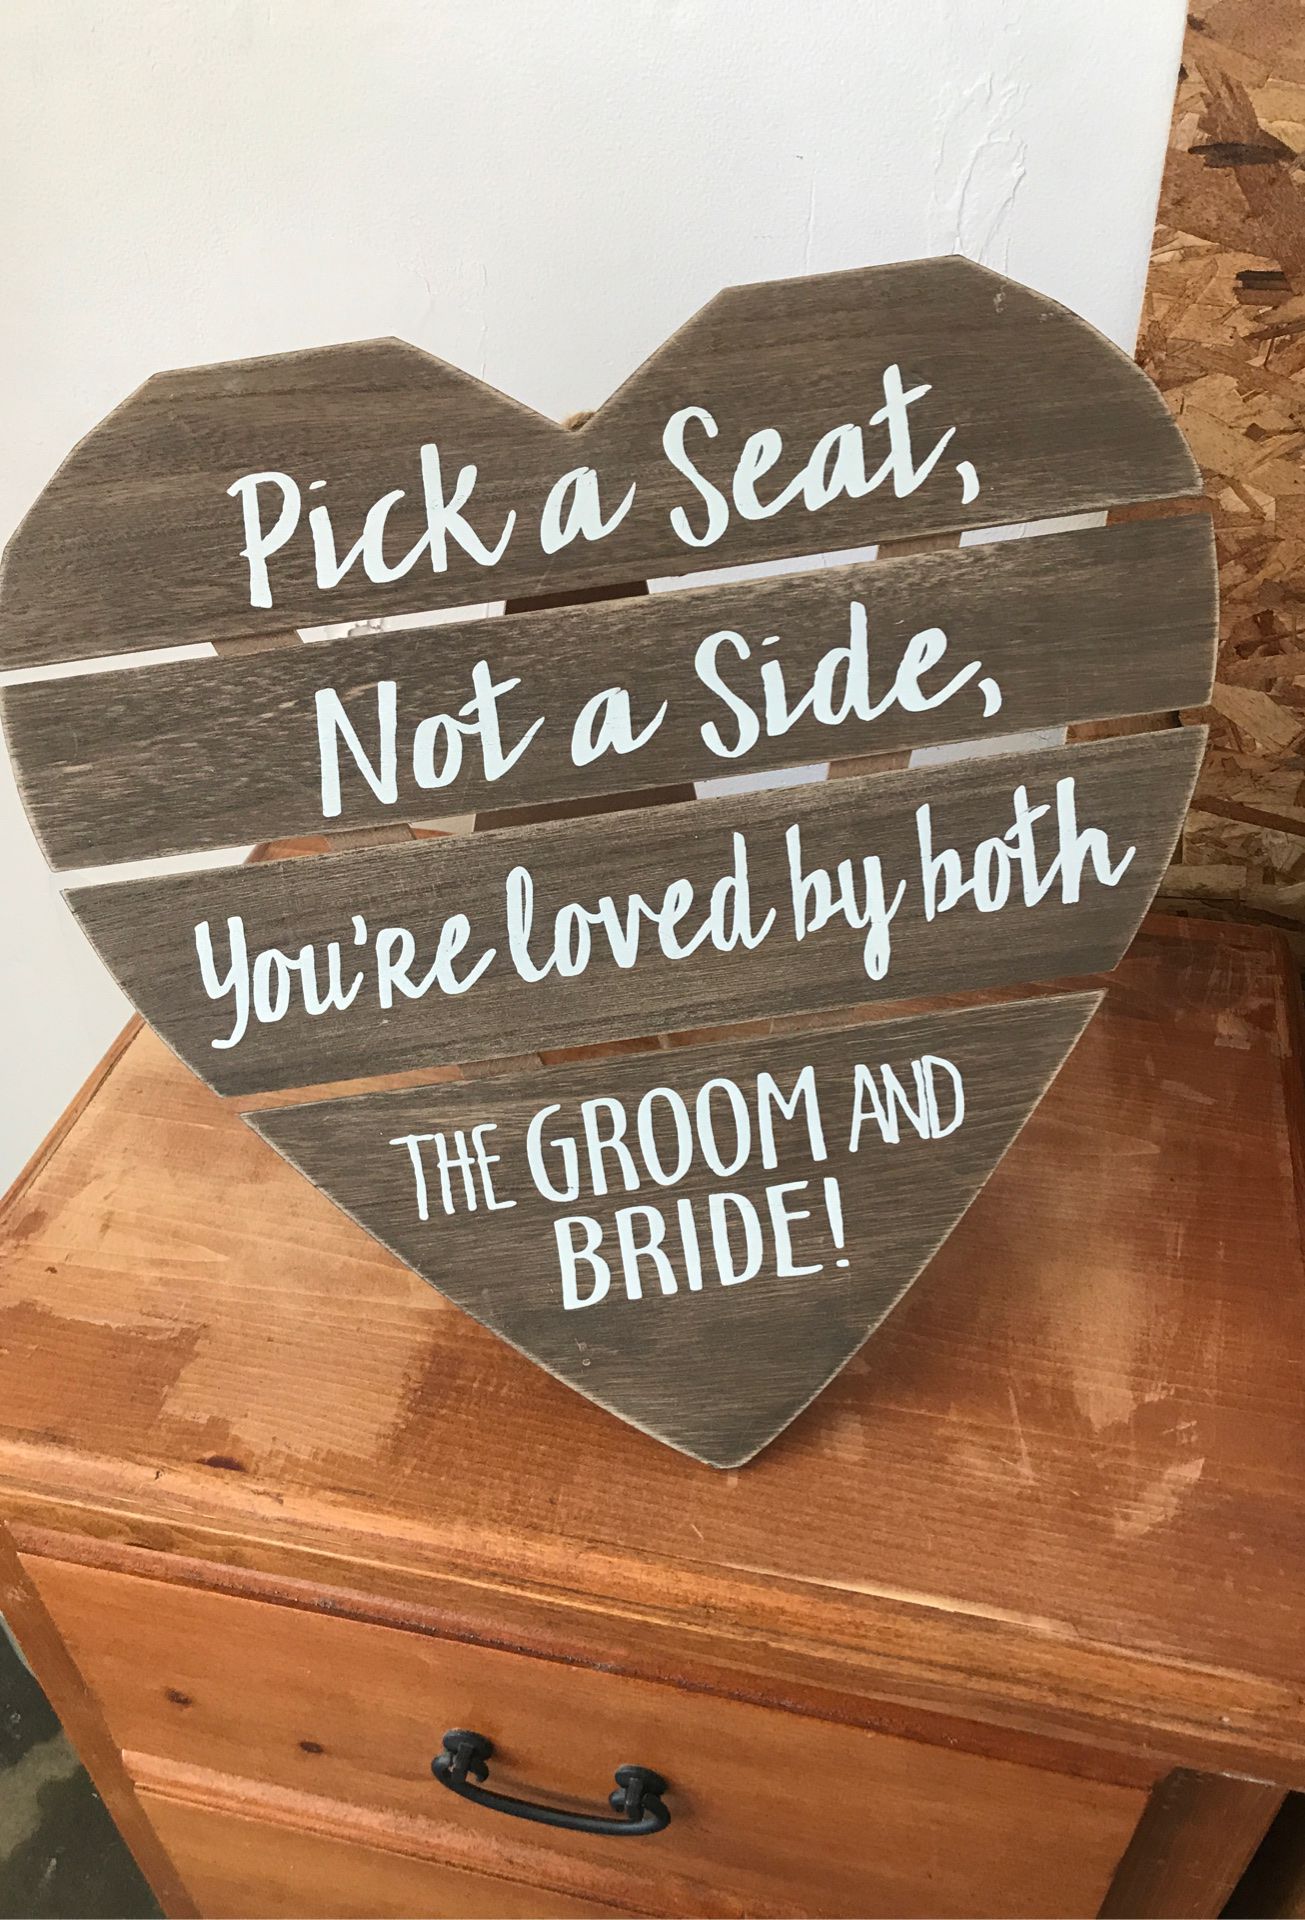 Weeding sign “pick a seat”